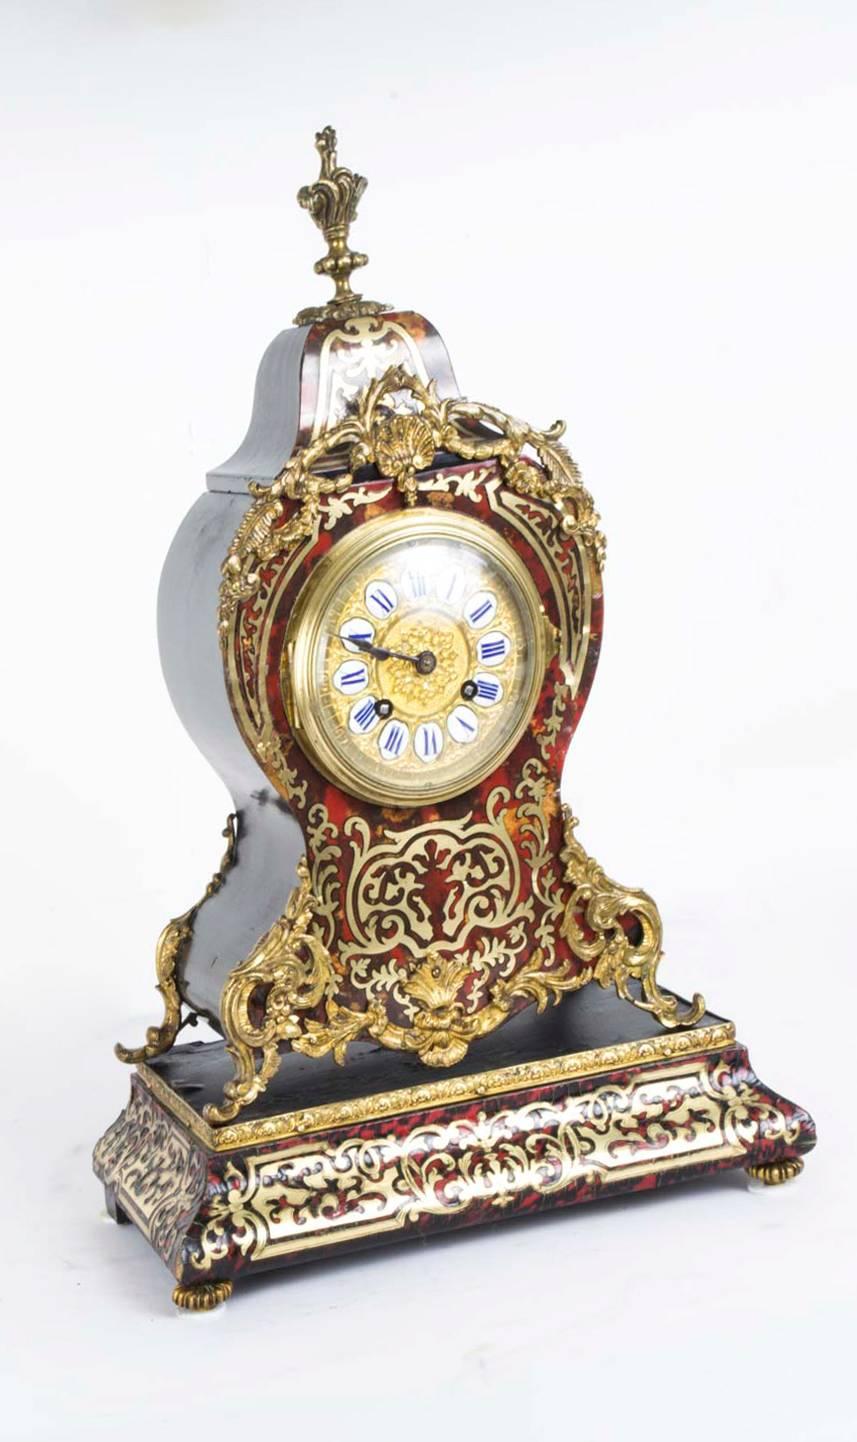 This is a beautiful antique French Boulle mantel clock on stand, circa 1870 in date.
This clock has a fabulous brass and enamel dial and a bell striking movement. The case and stand is of beautiful red Boulle, with cut brass inlaid decoration, and